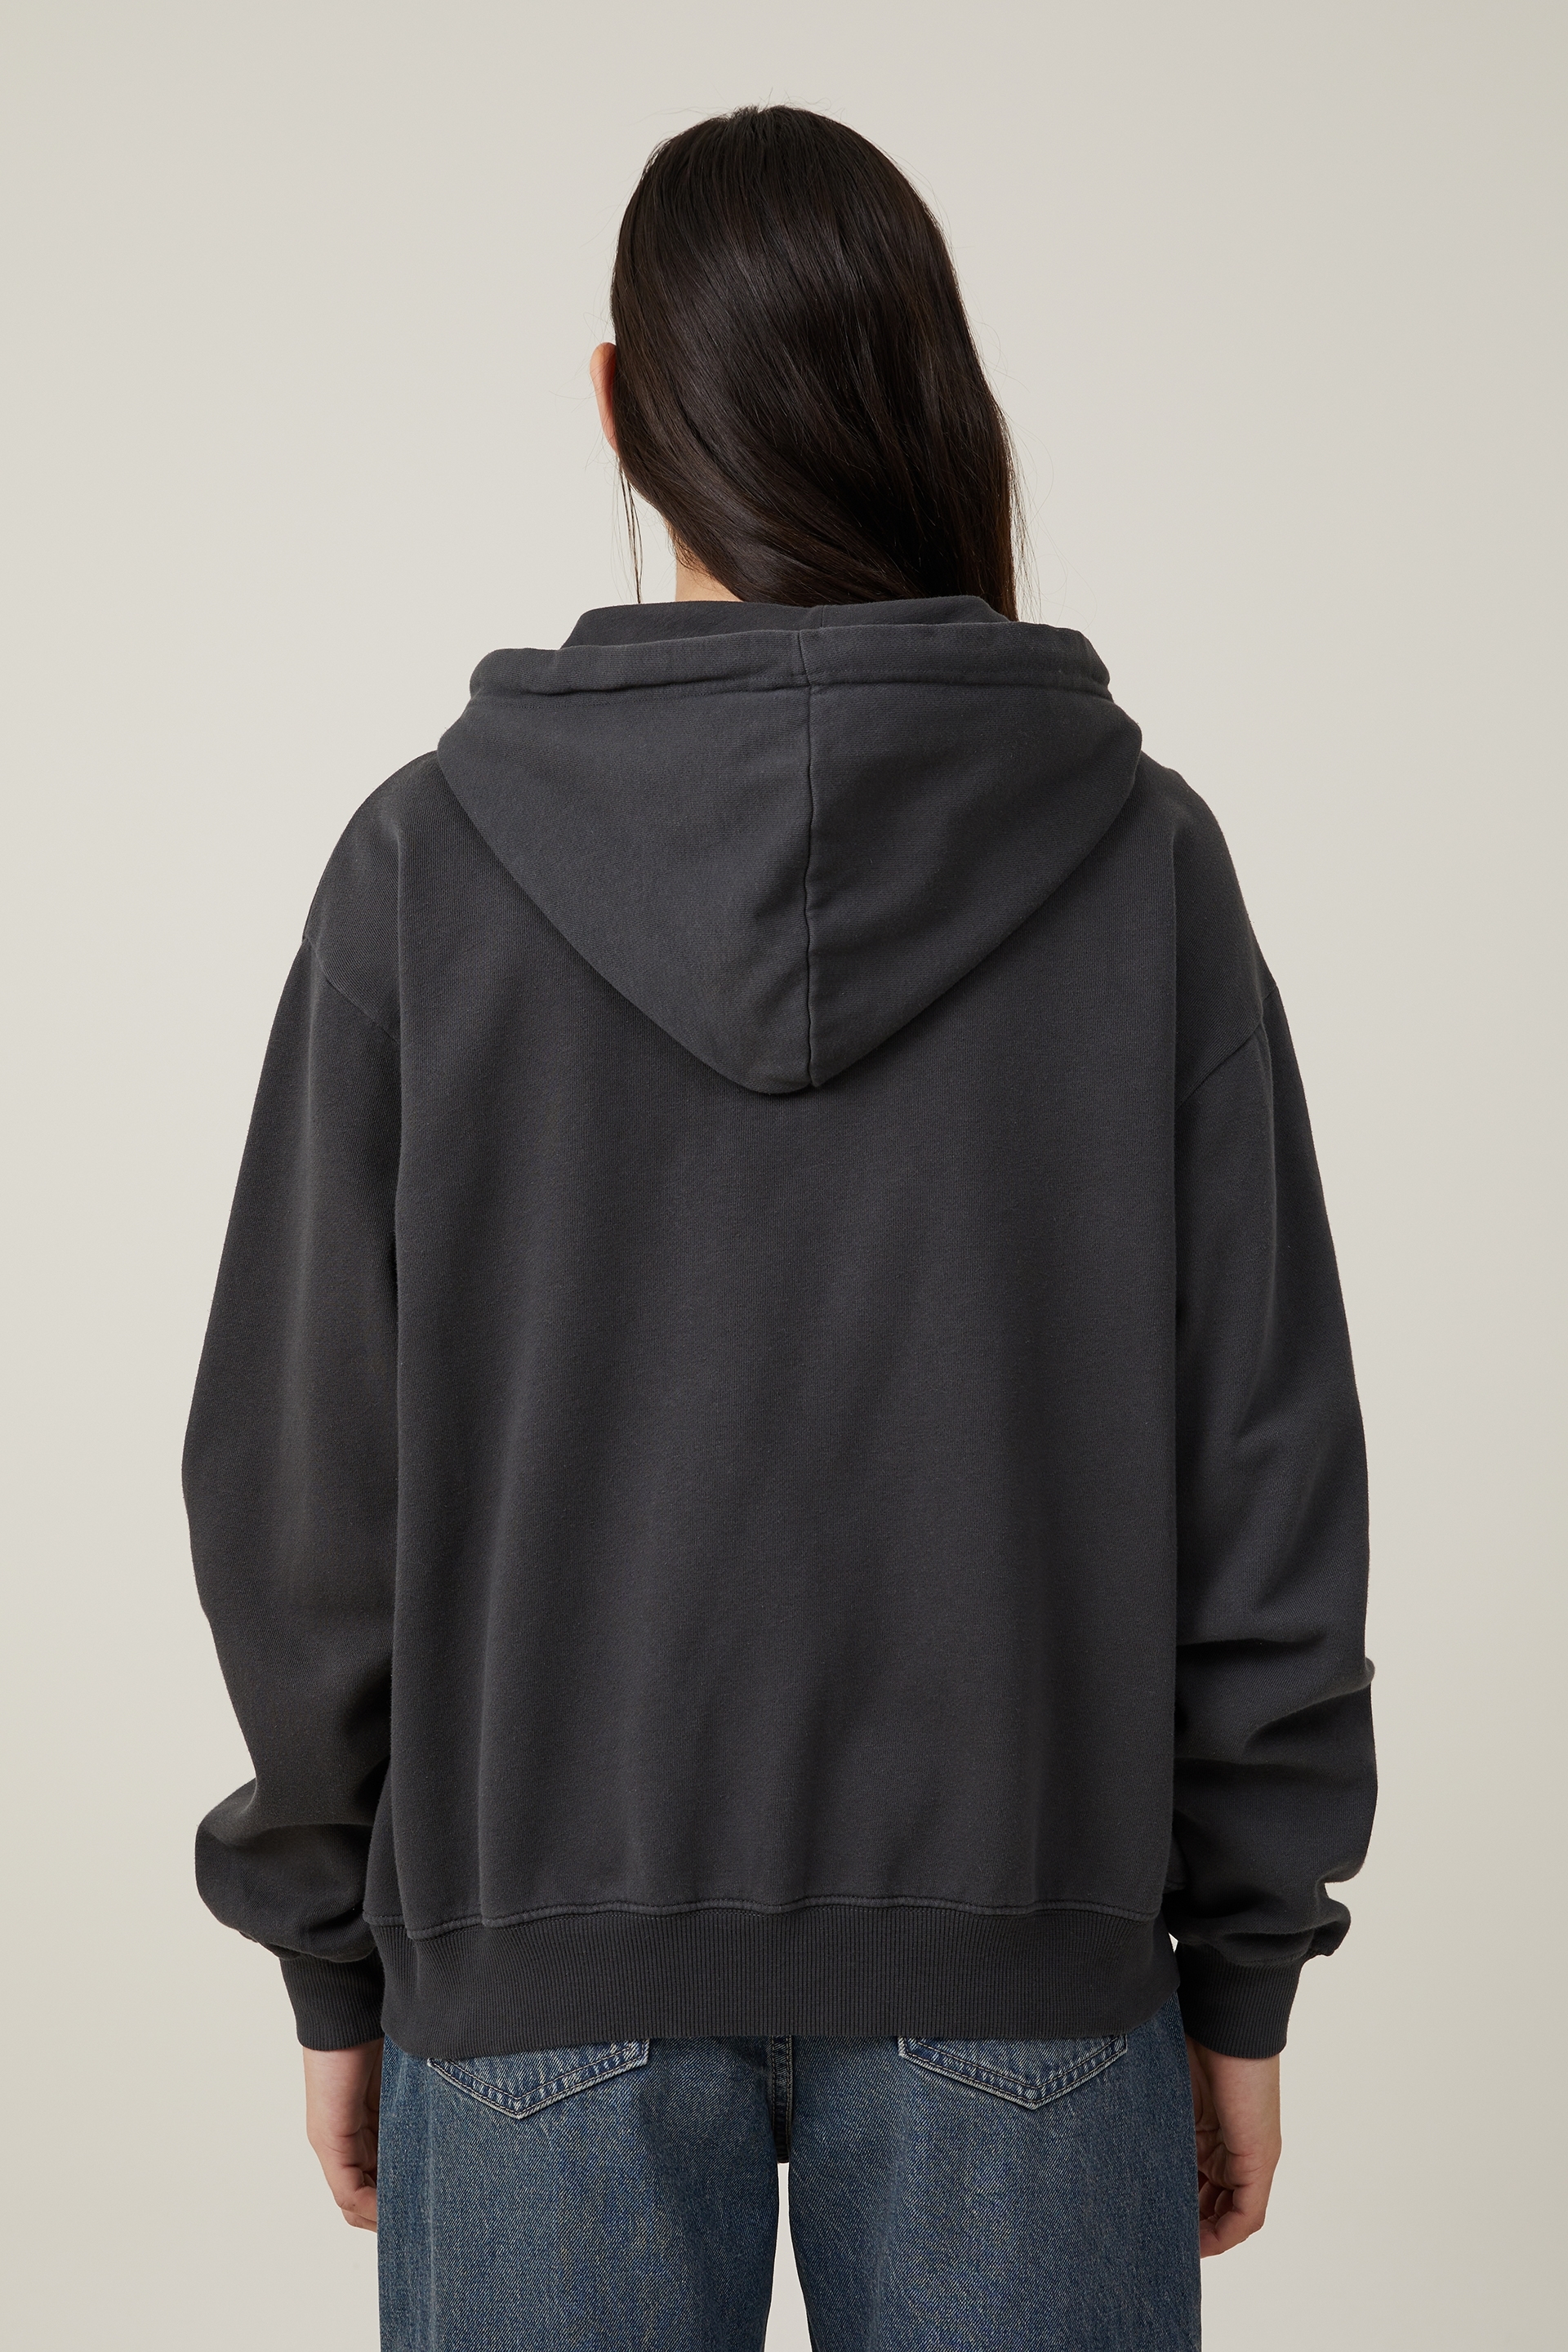 Cotton on Women's Classic Washed Zip-Through Hoodie